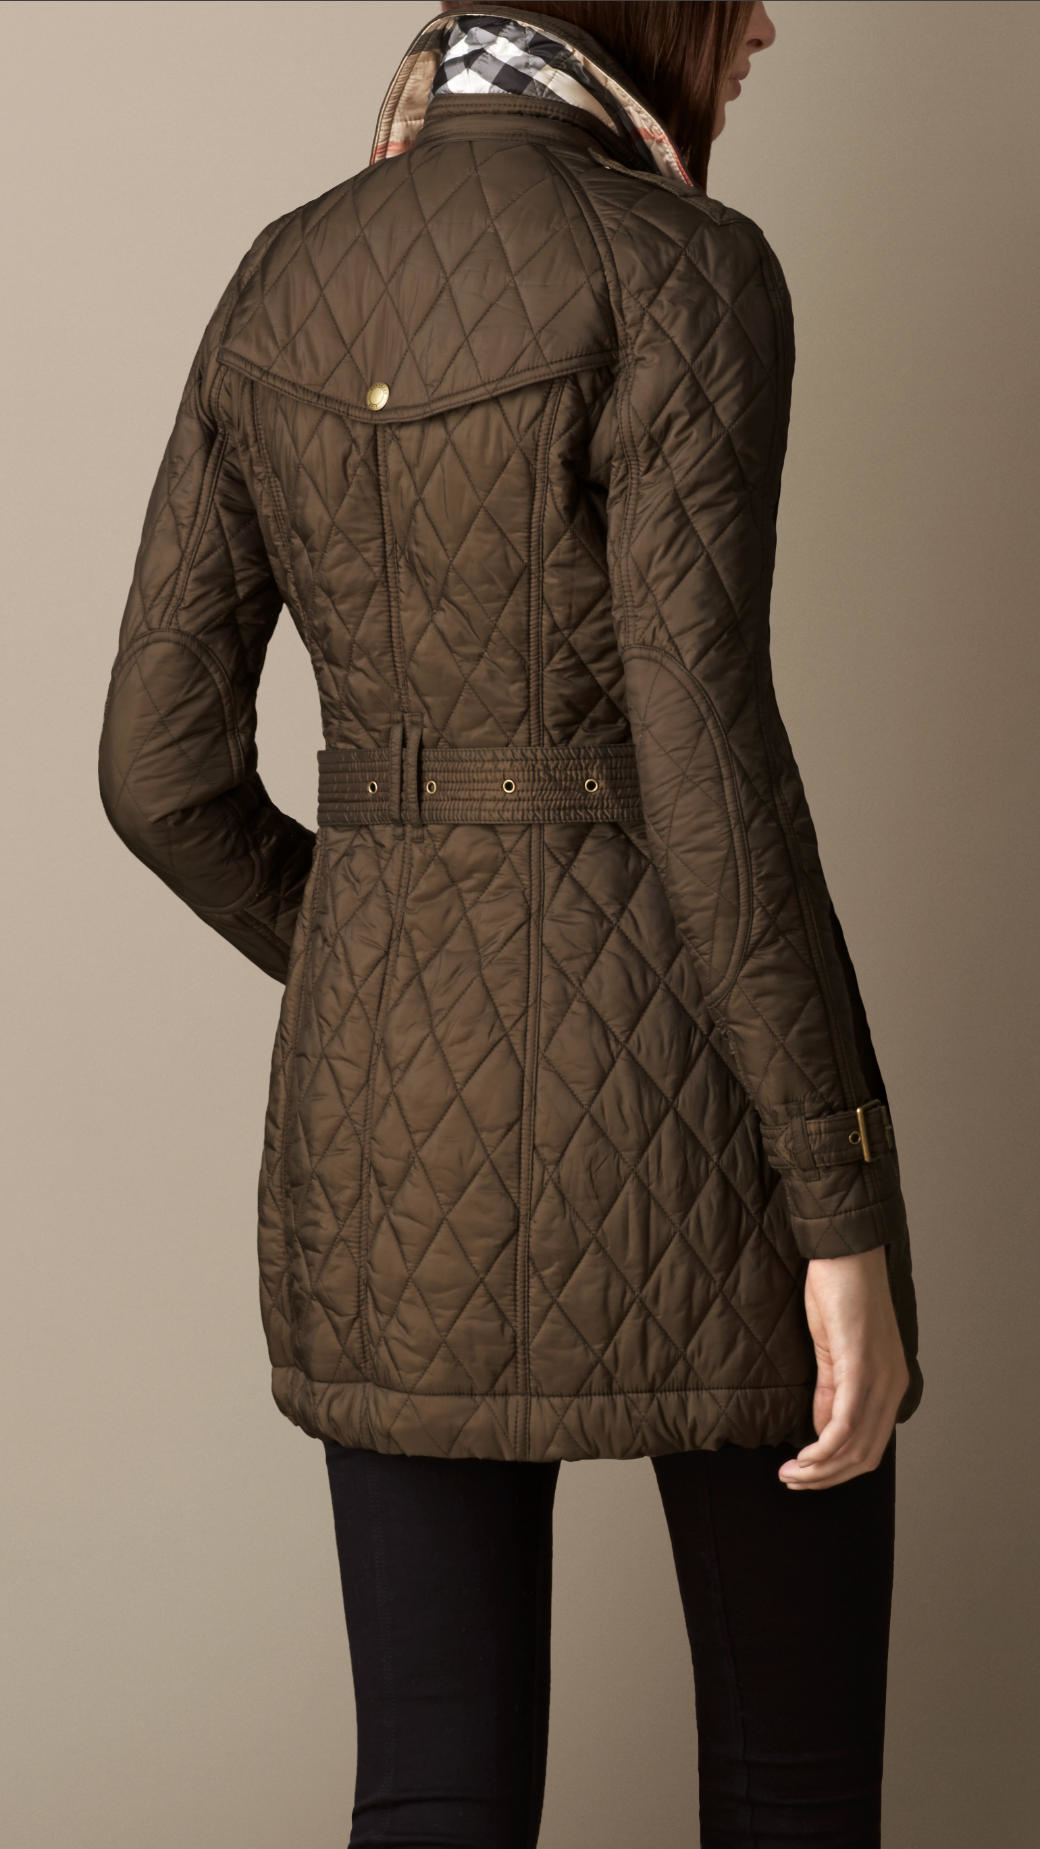 Lyst - Burberry Diamond Quilted Coat in Natural